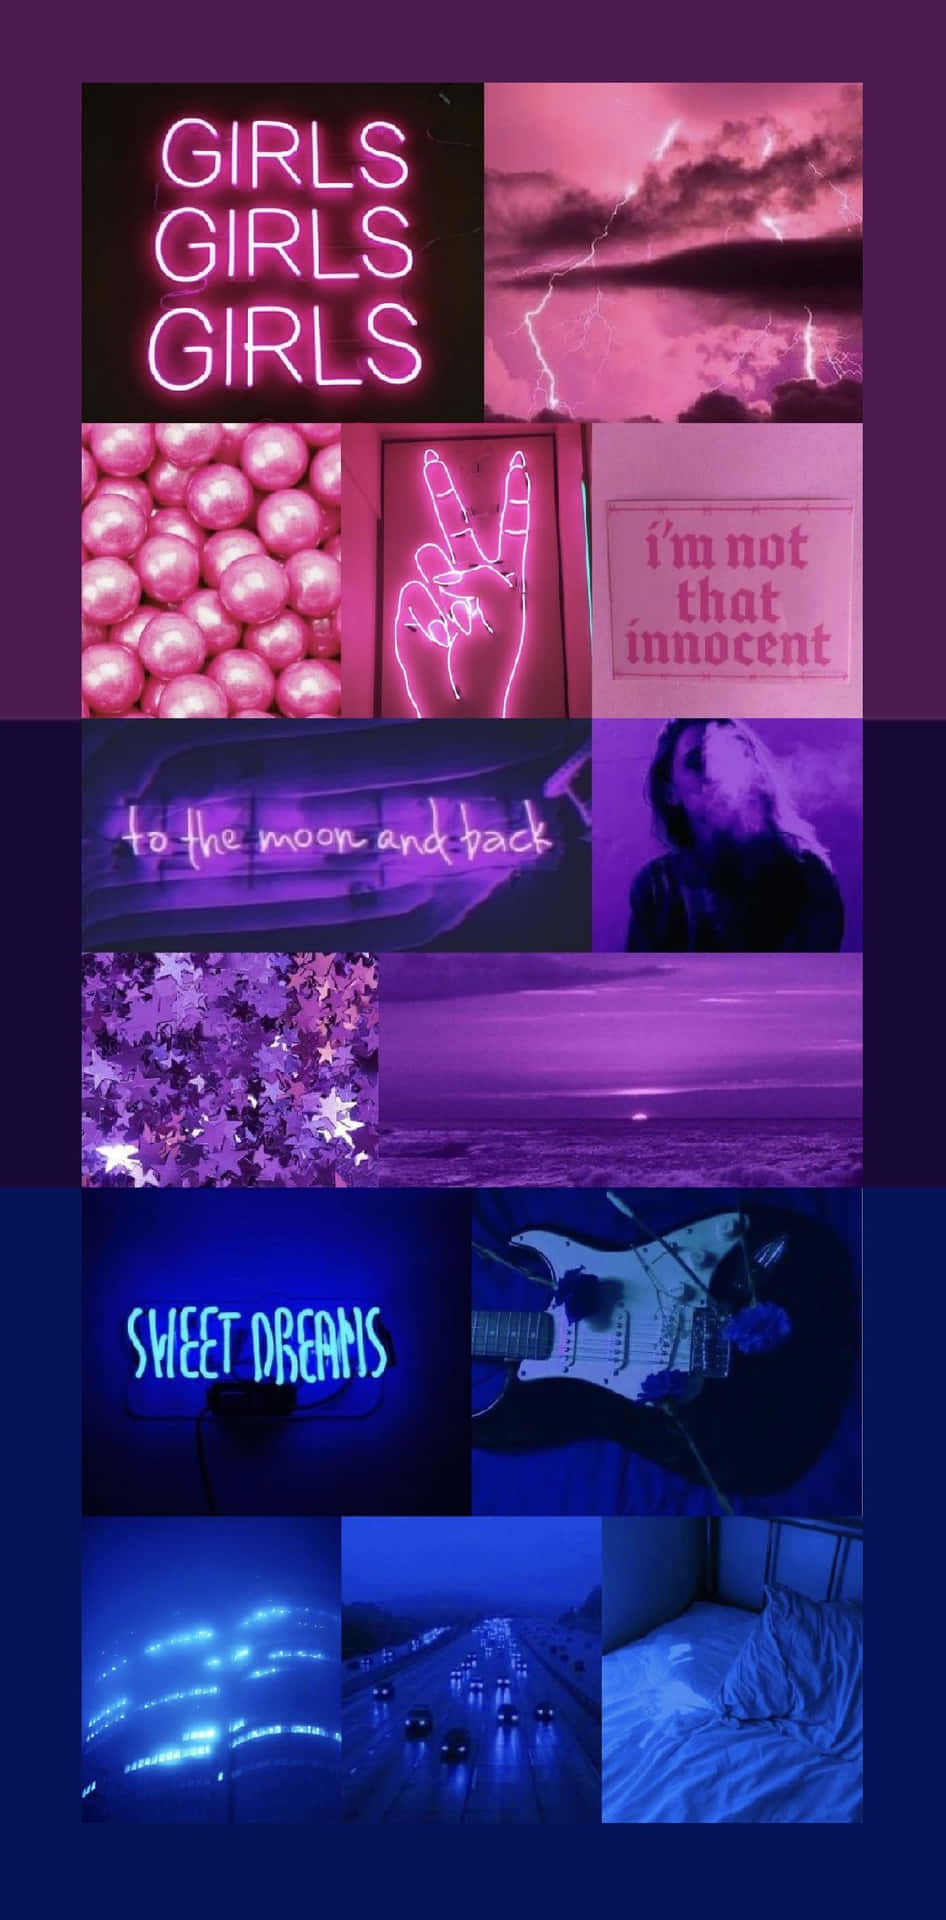 A Purple And Blue Collage With Pictures Of Girls And Girls